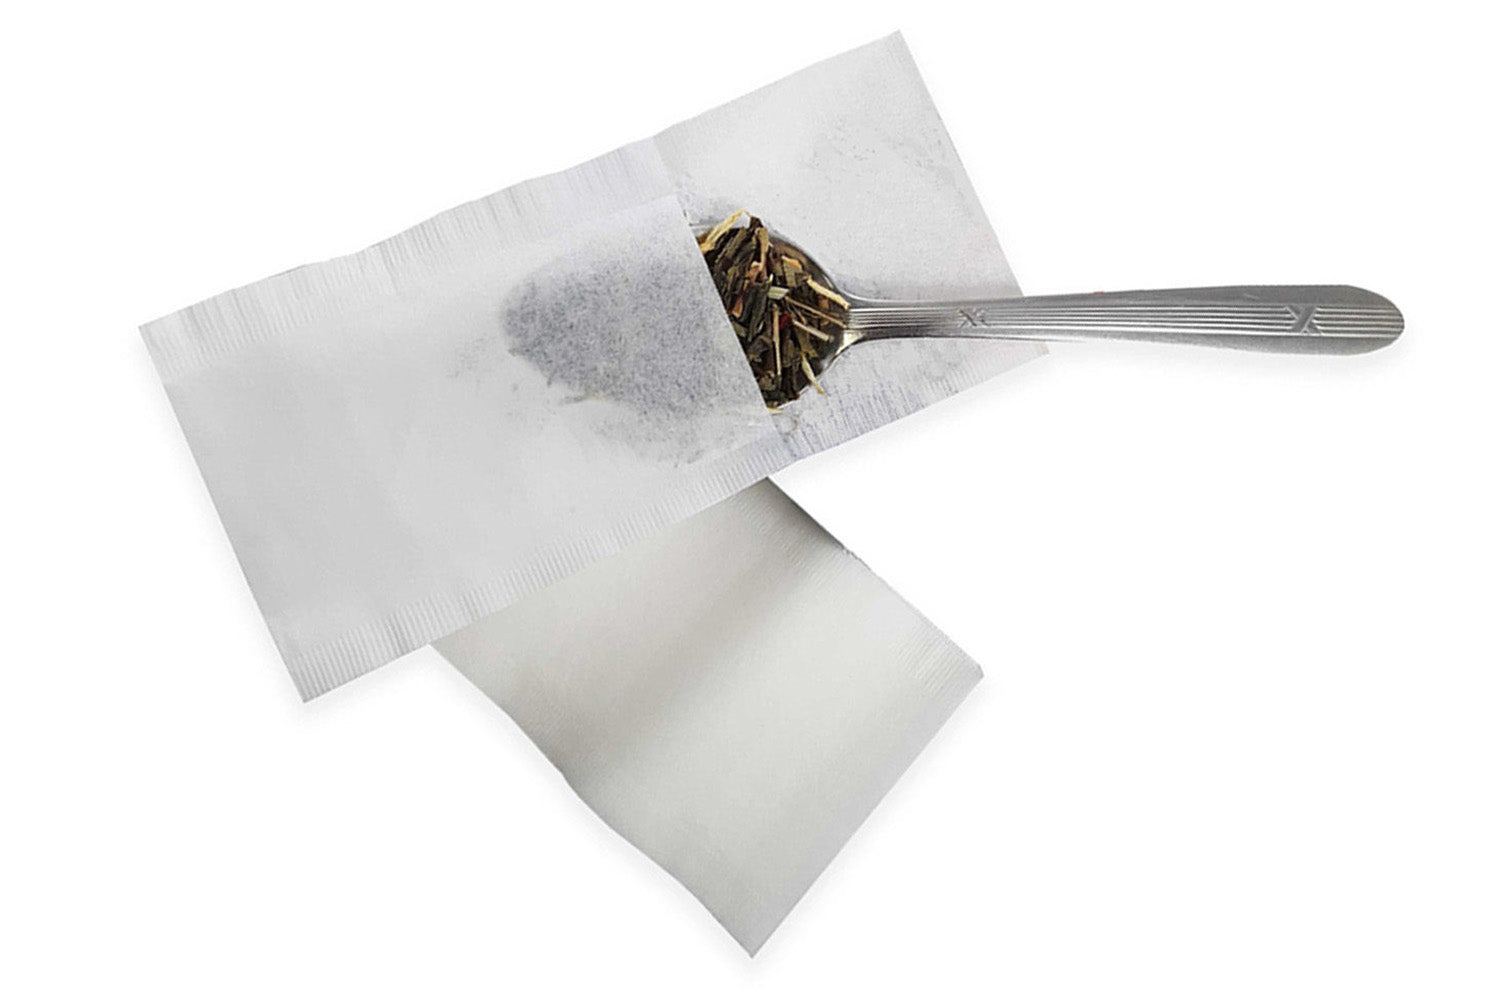 HOW FILL YOUR TEA BAGS